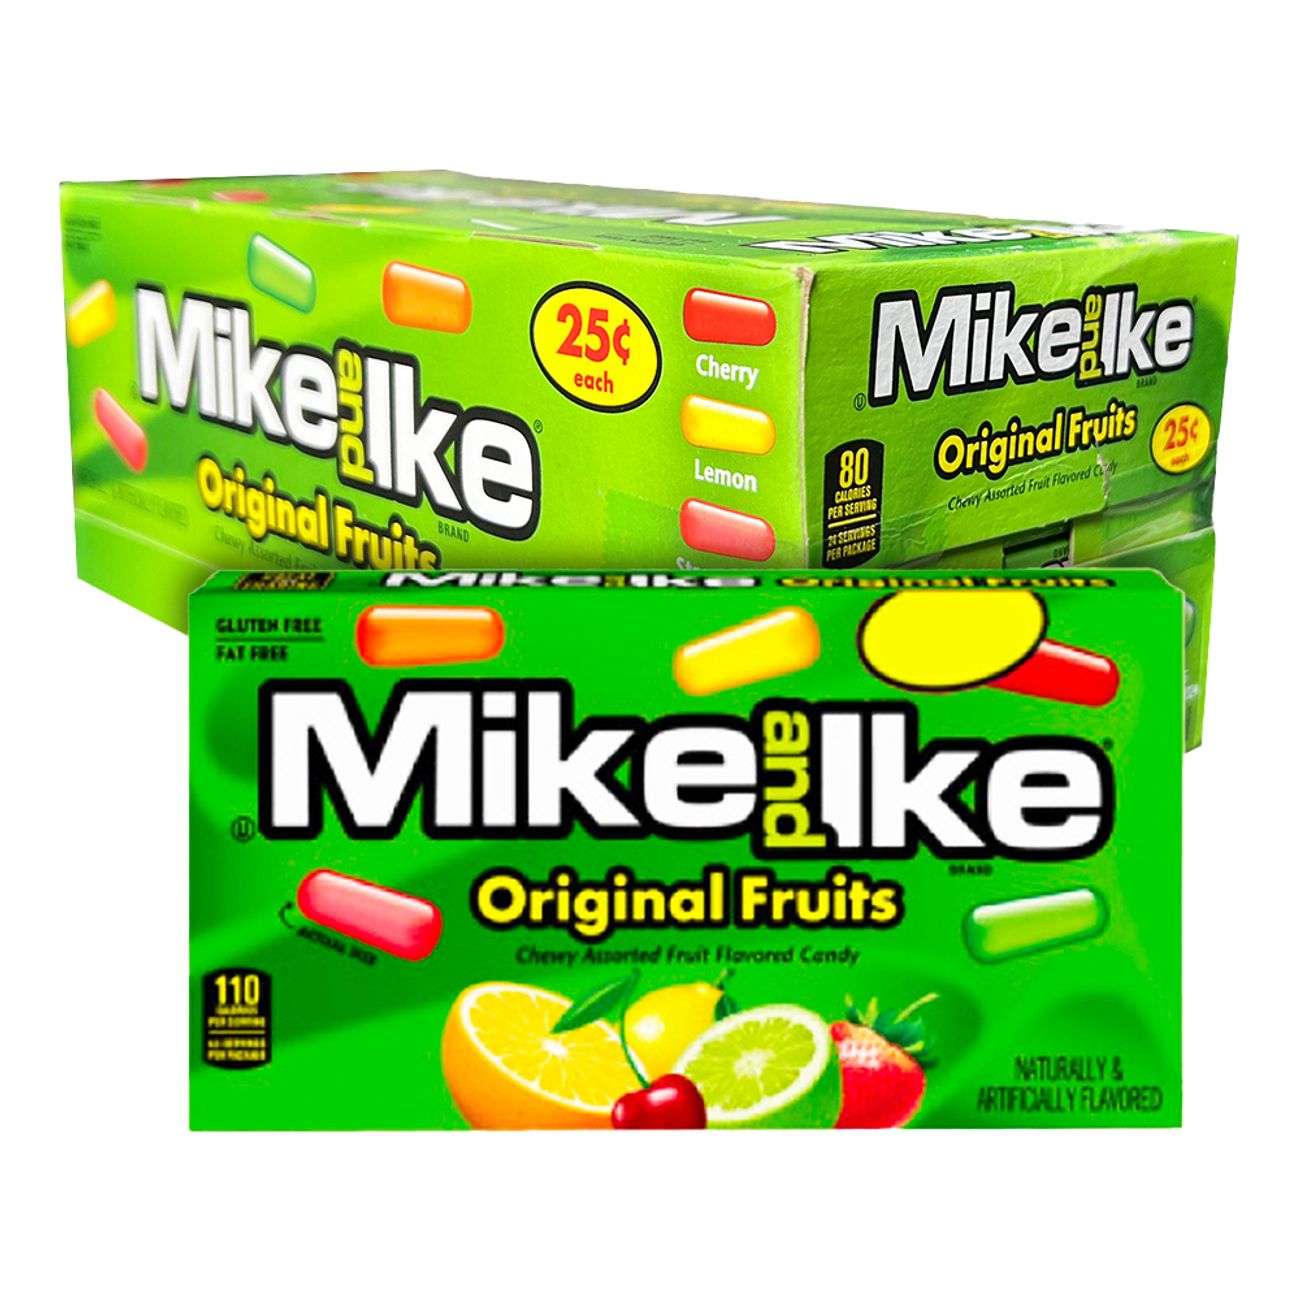 mike-and-ike-original-fruits-storpack-99902-2